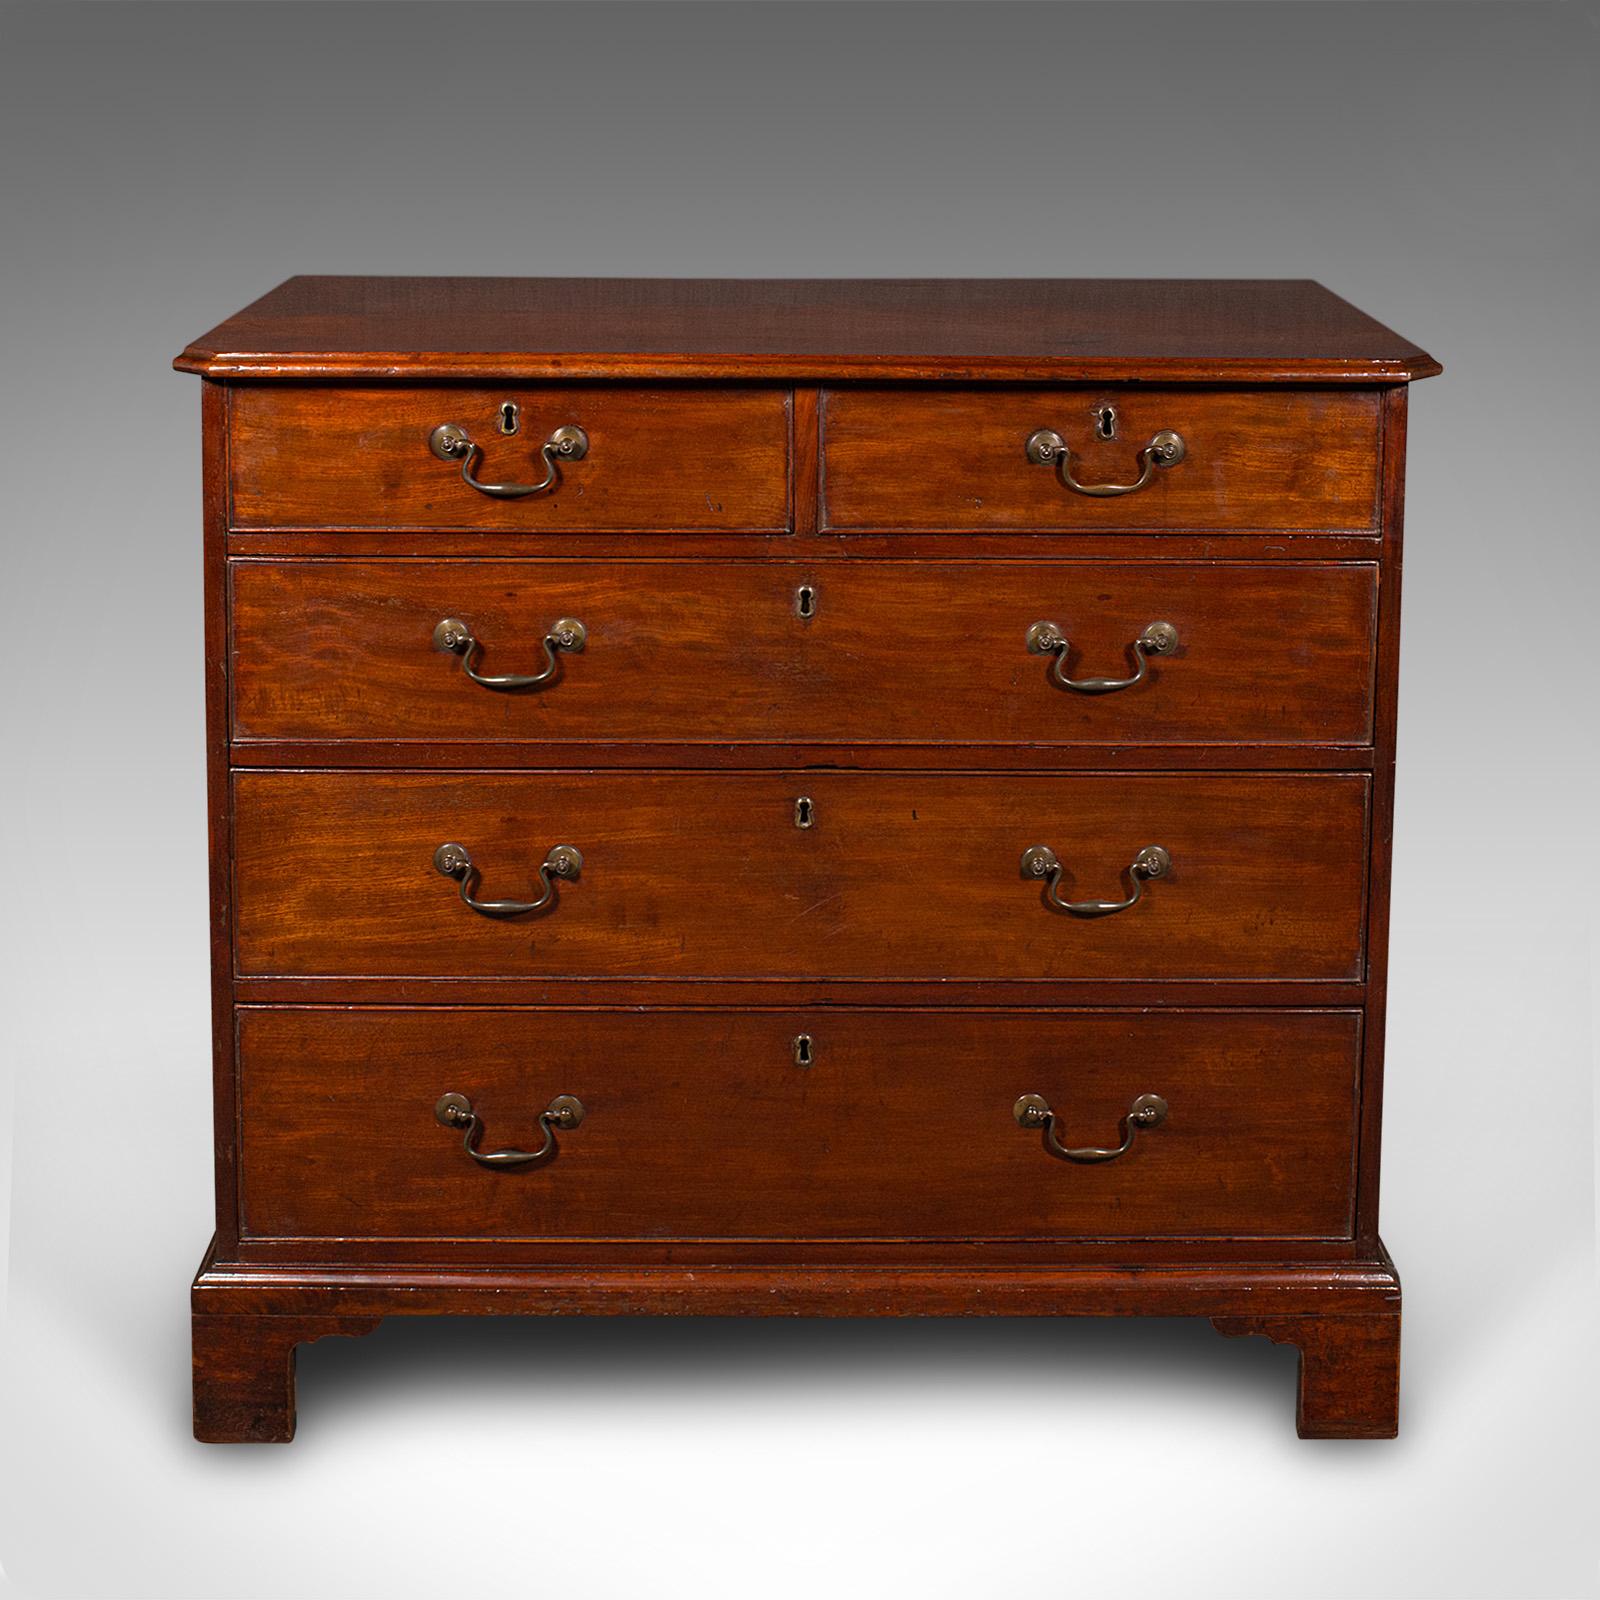 This is an antique tallboy. An English, mahogany and oak chest of drawers, dating to the Georgian period, circa 1790.

Wonderfully figured and presenting fine colour
Displaying a desirable aged patina throughout
Select stocks show fine grain